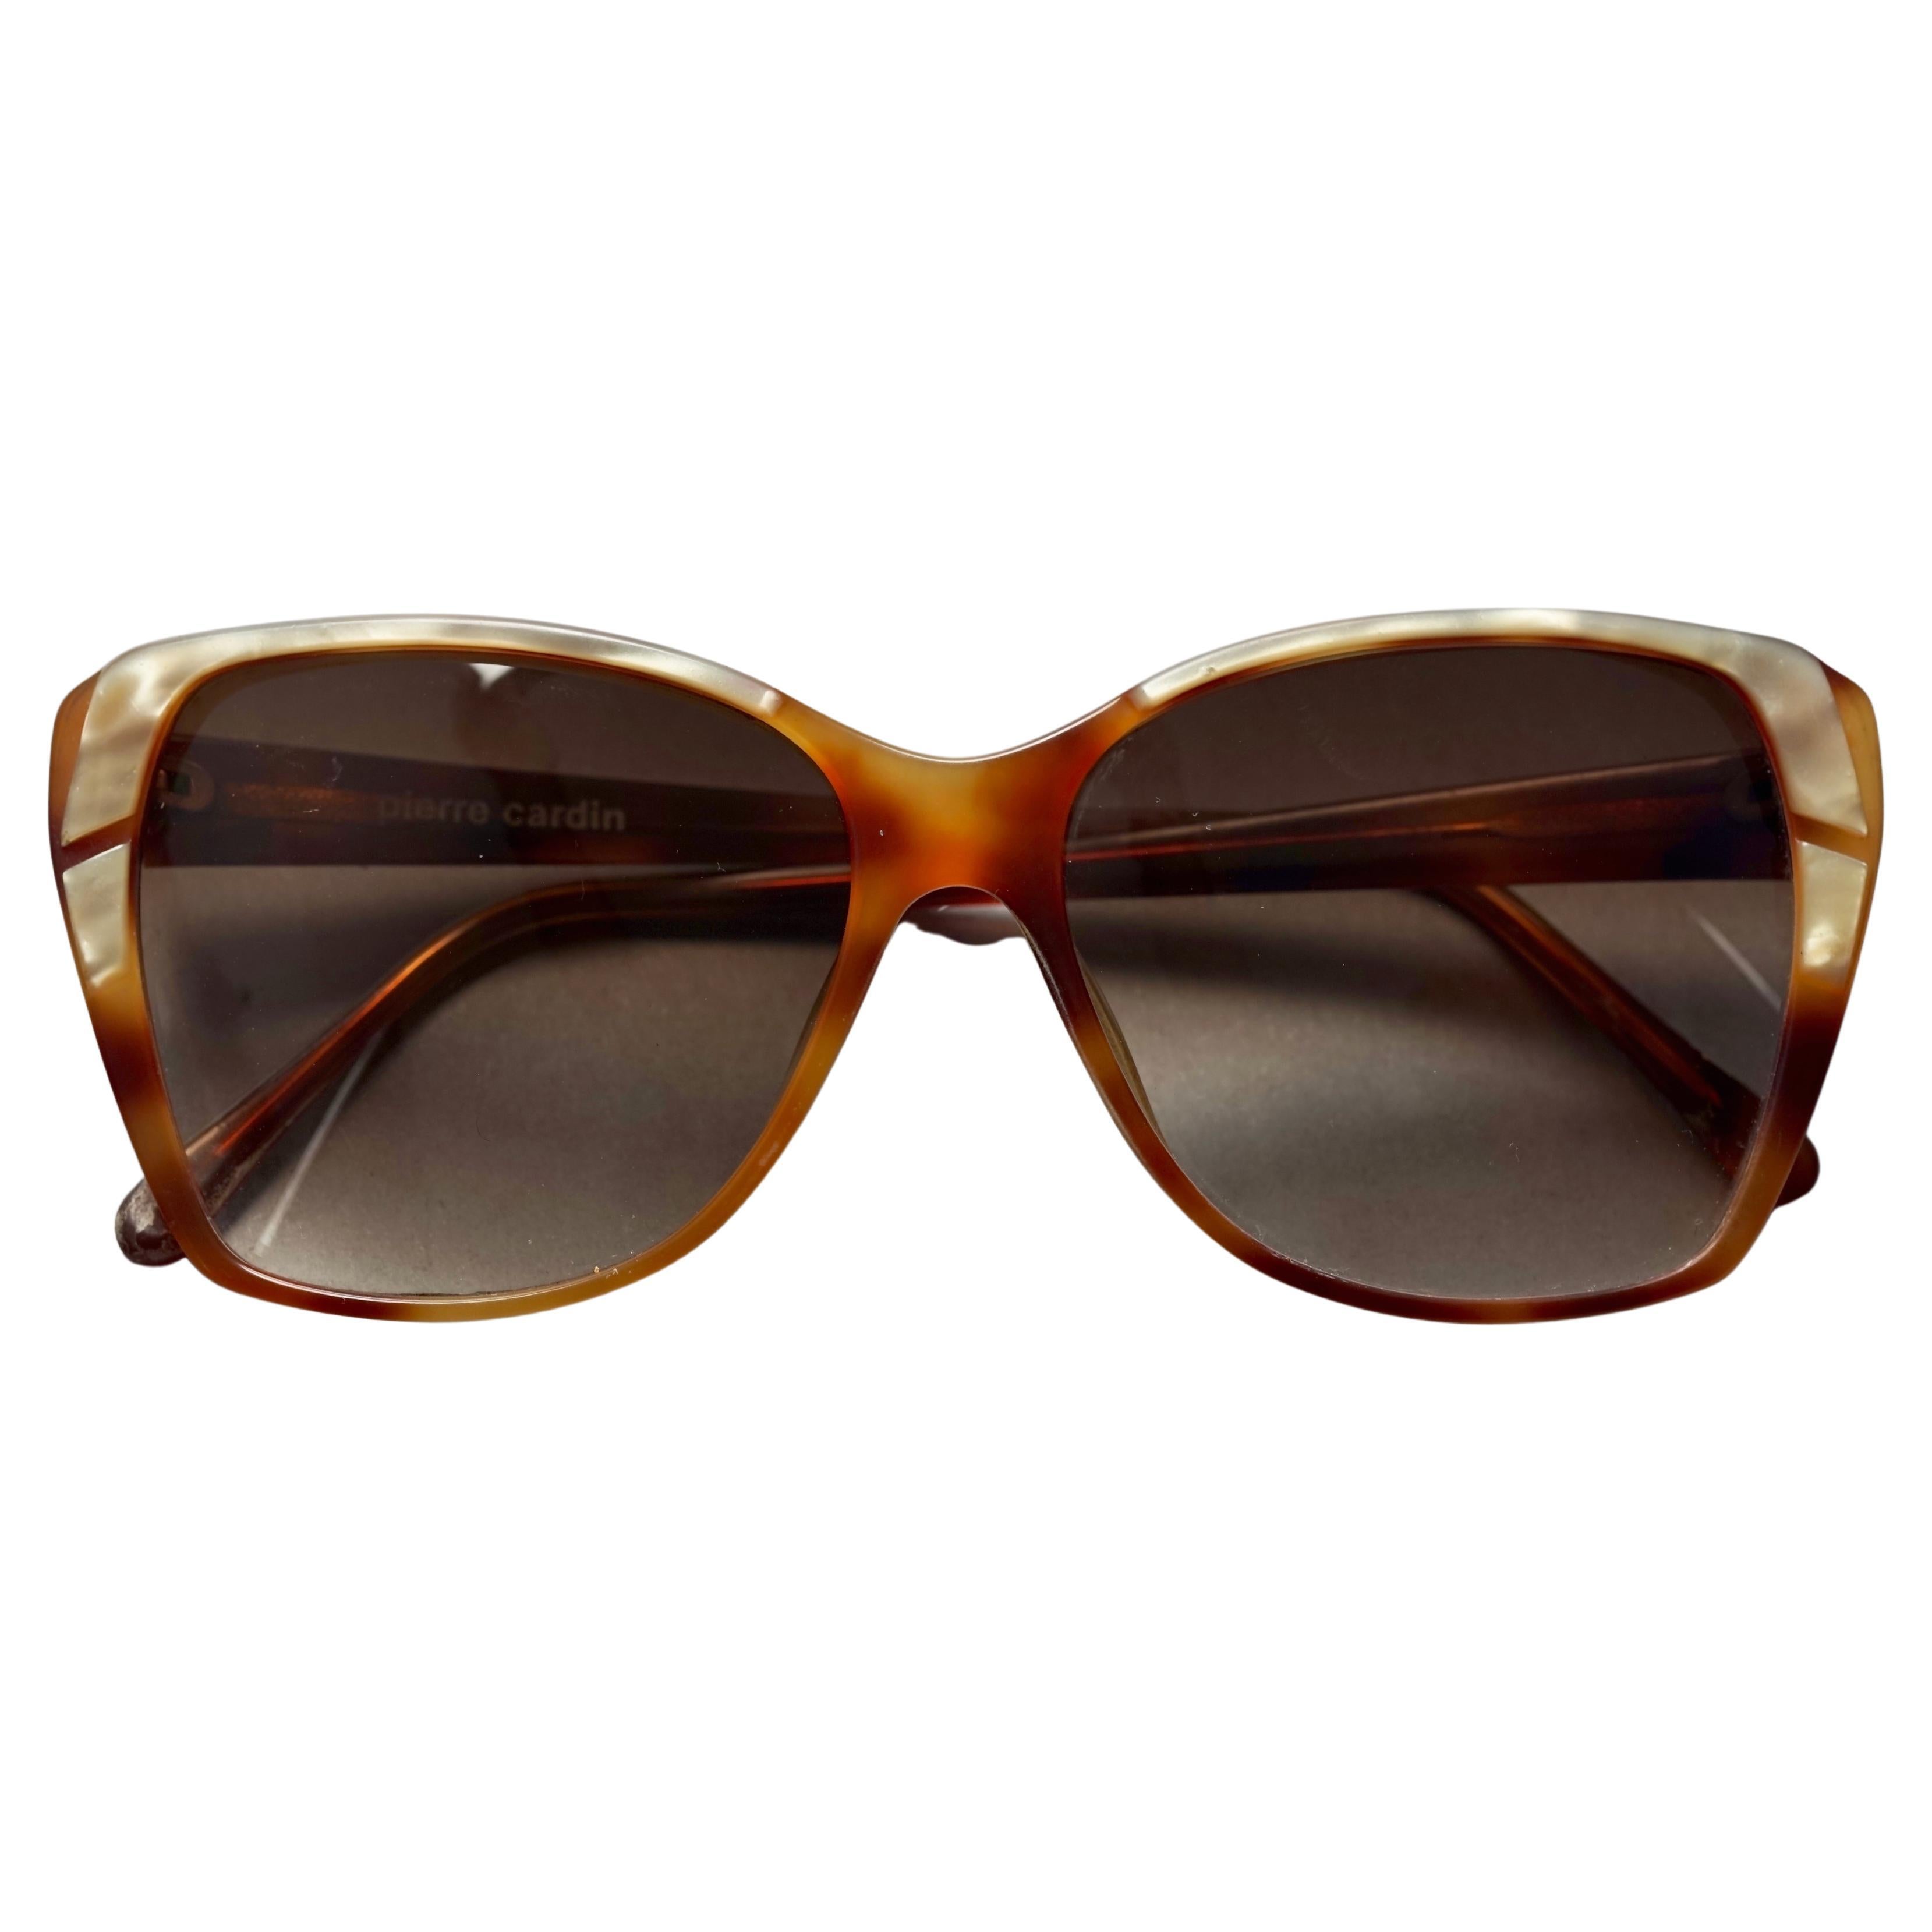 Brown CHANEL MOTHER OF PEARL SUNGLASSES for Sale in Los